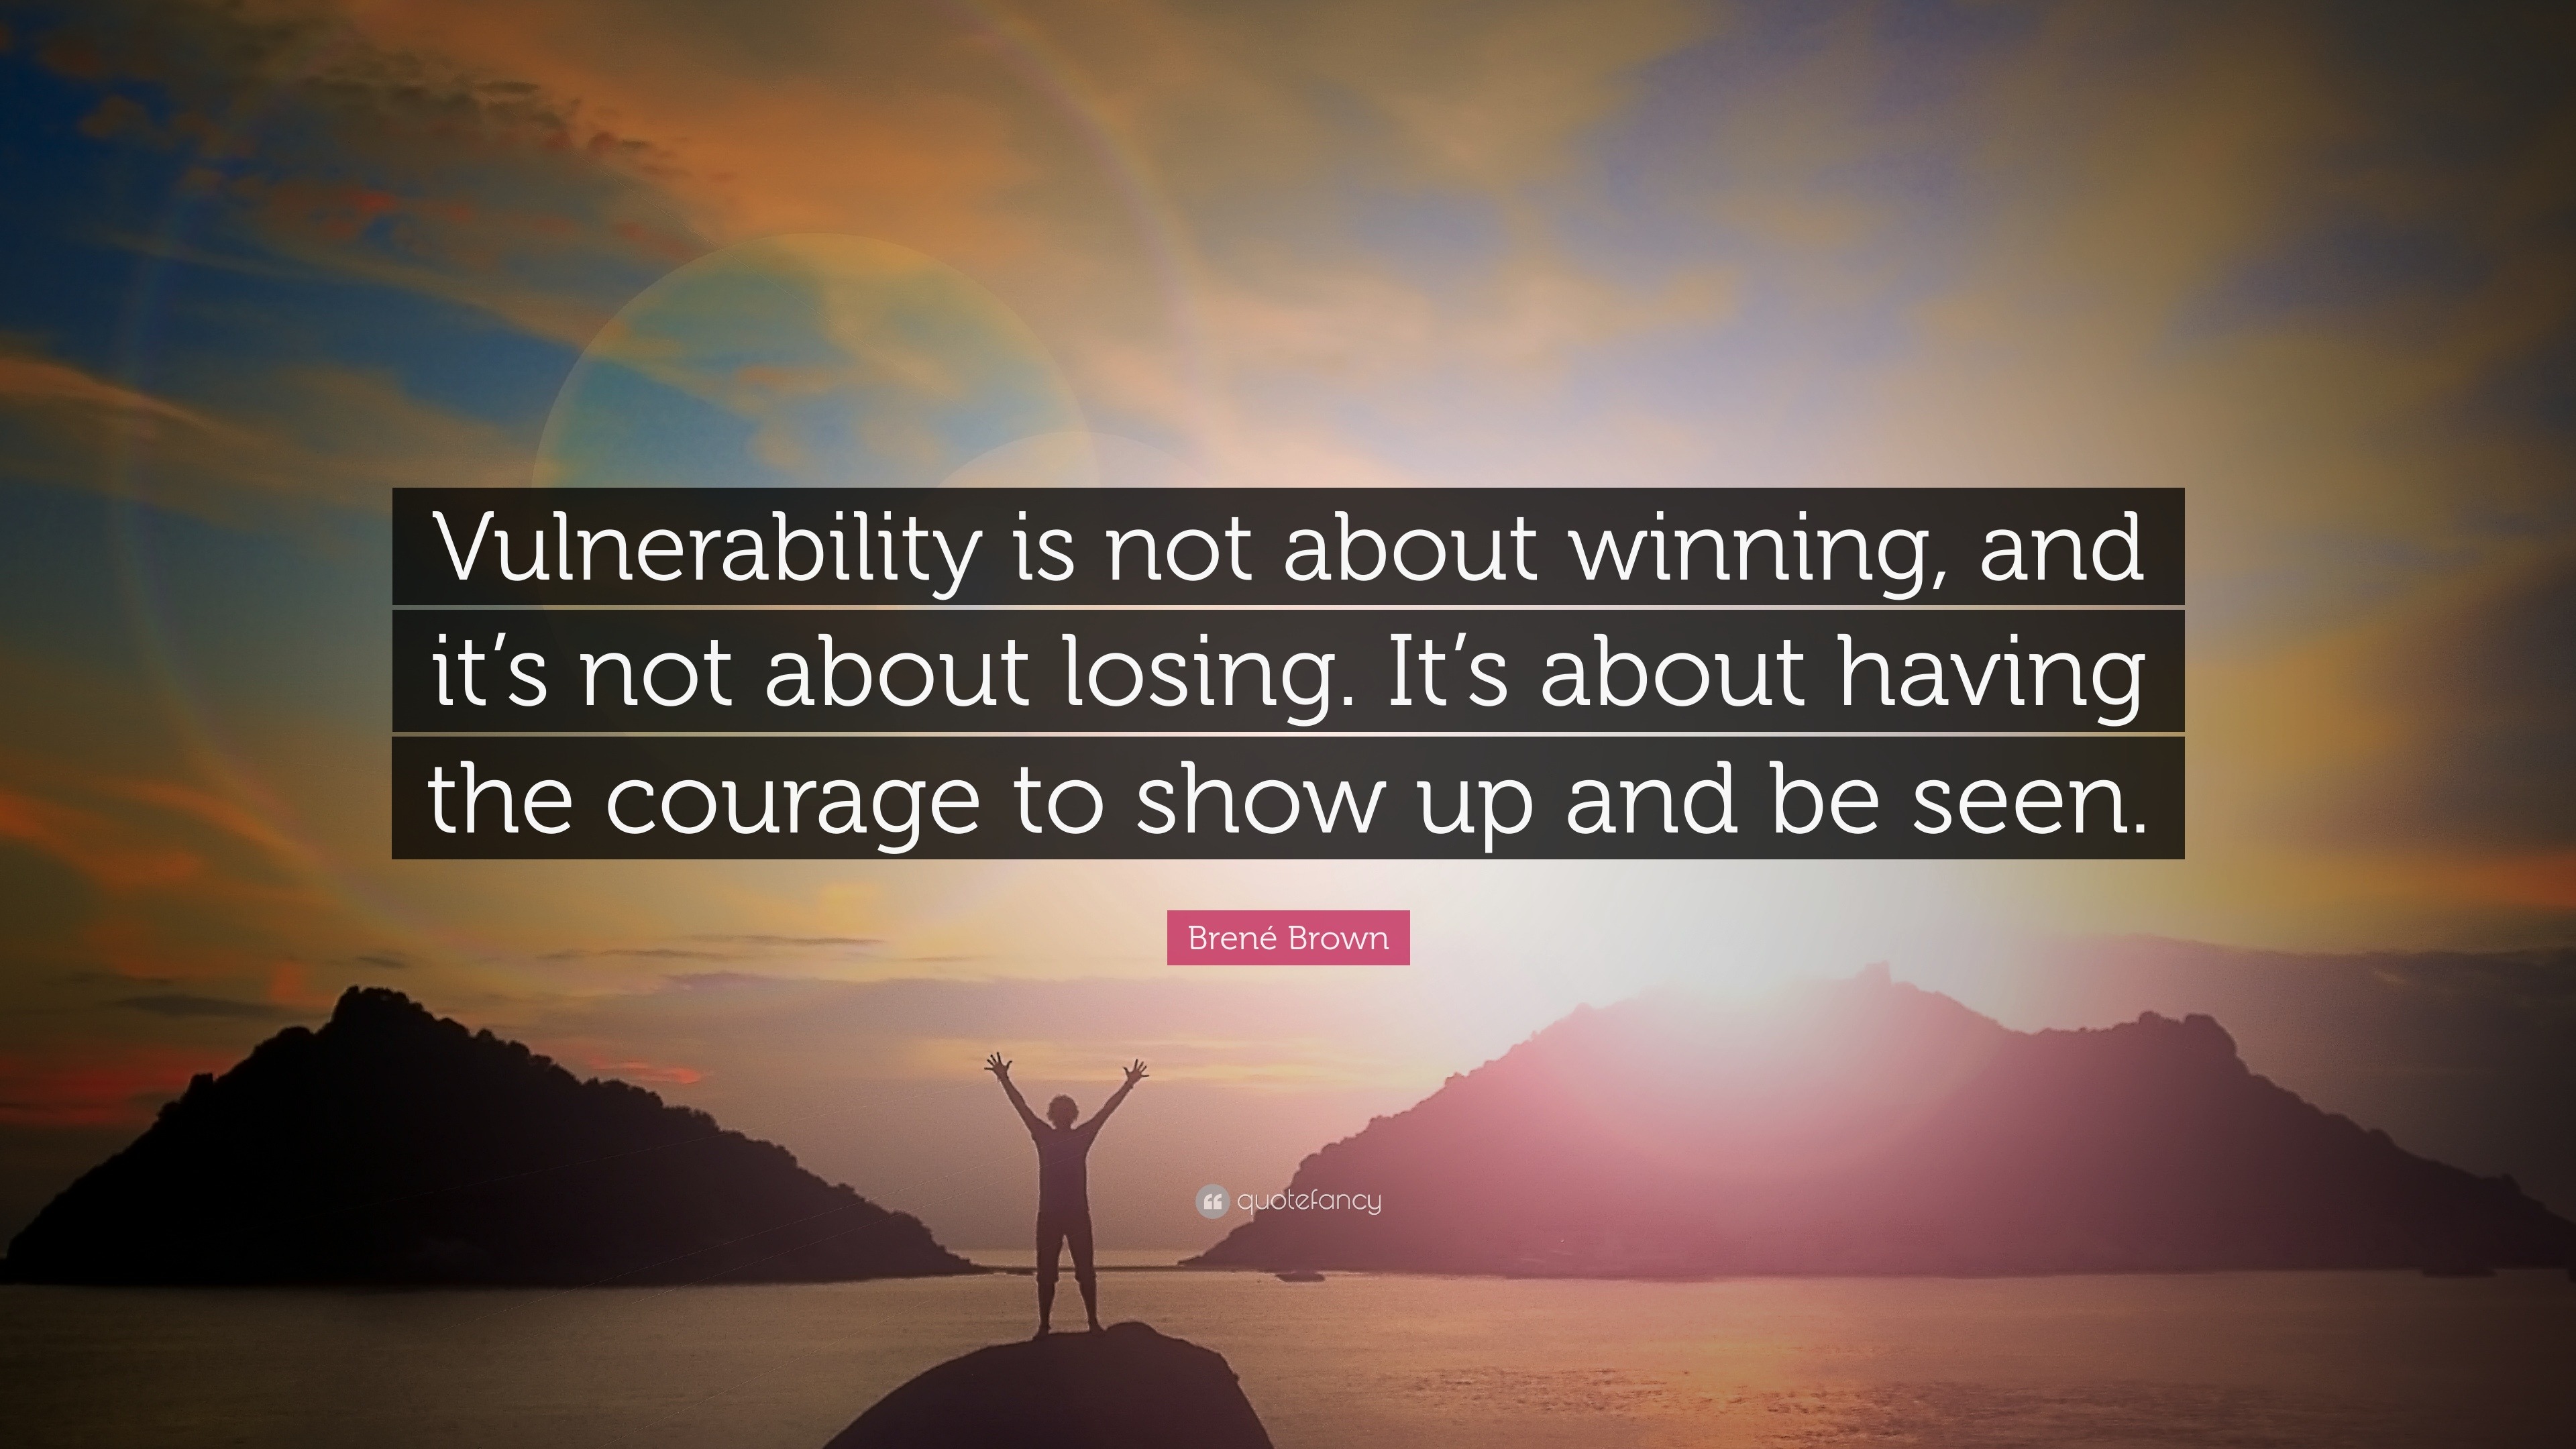 Brené Brown Quote: “Vulnerability is not about winning, and it’s not